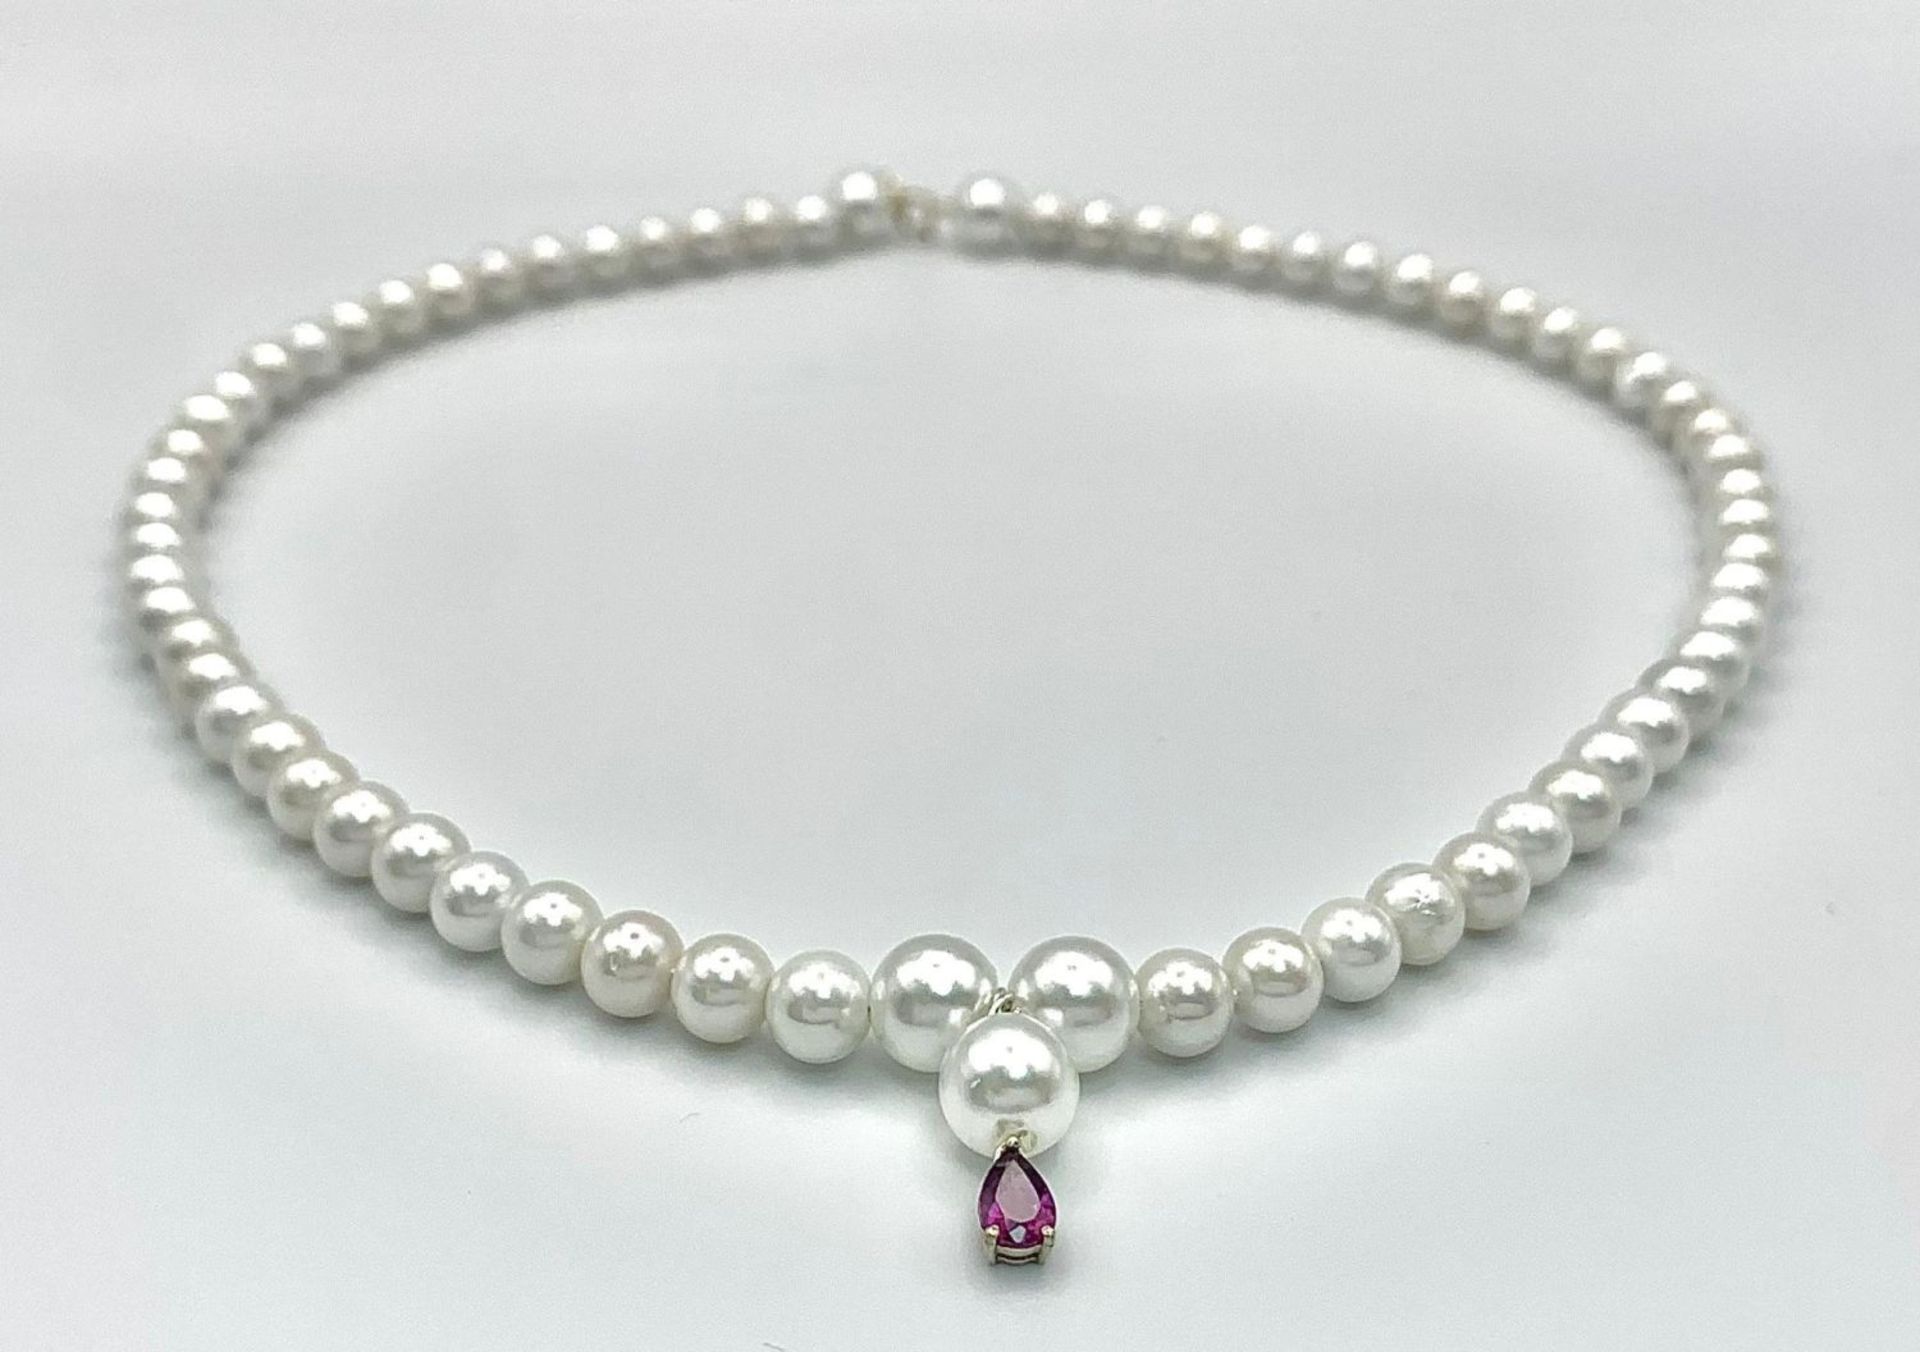 A faux pearl necklace with a 14 K yellow gold clasp and a small amethyst pendant. Length: 43 cm, - Image 3 of 7